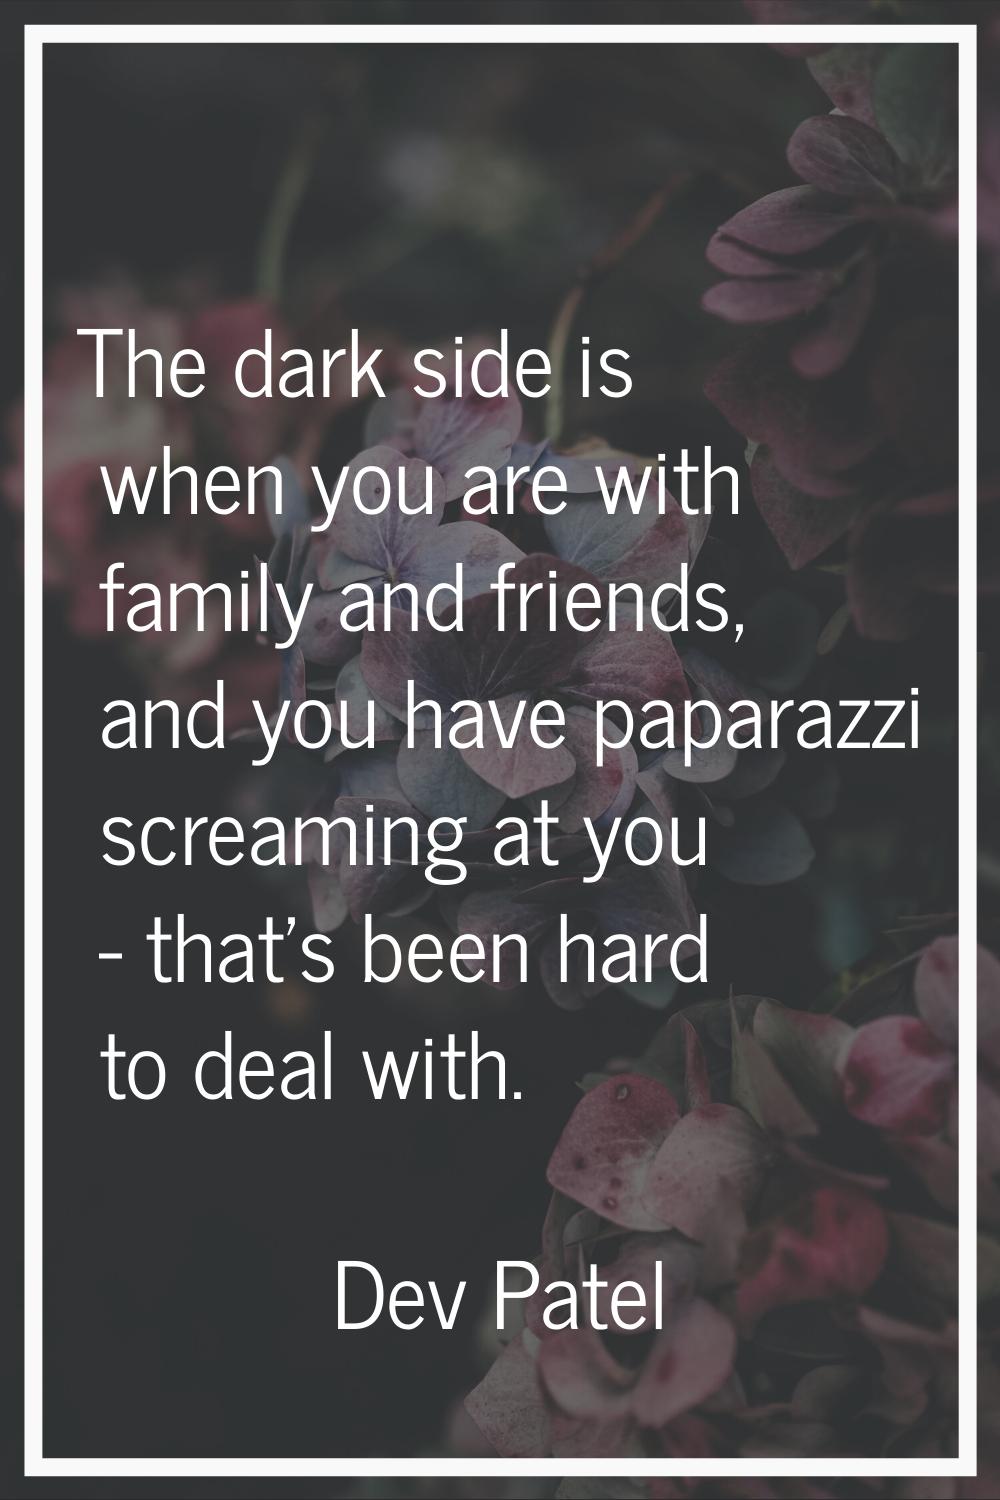 The dark side is when you are with family and friends, and you have paparazzi screaming at you - th